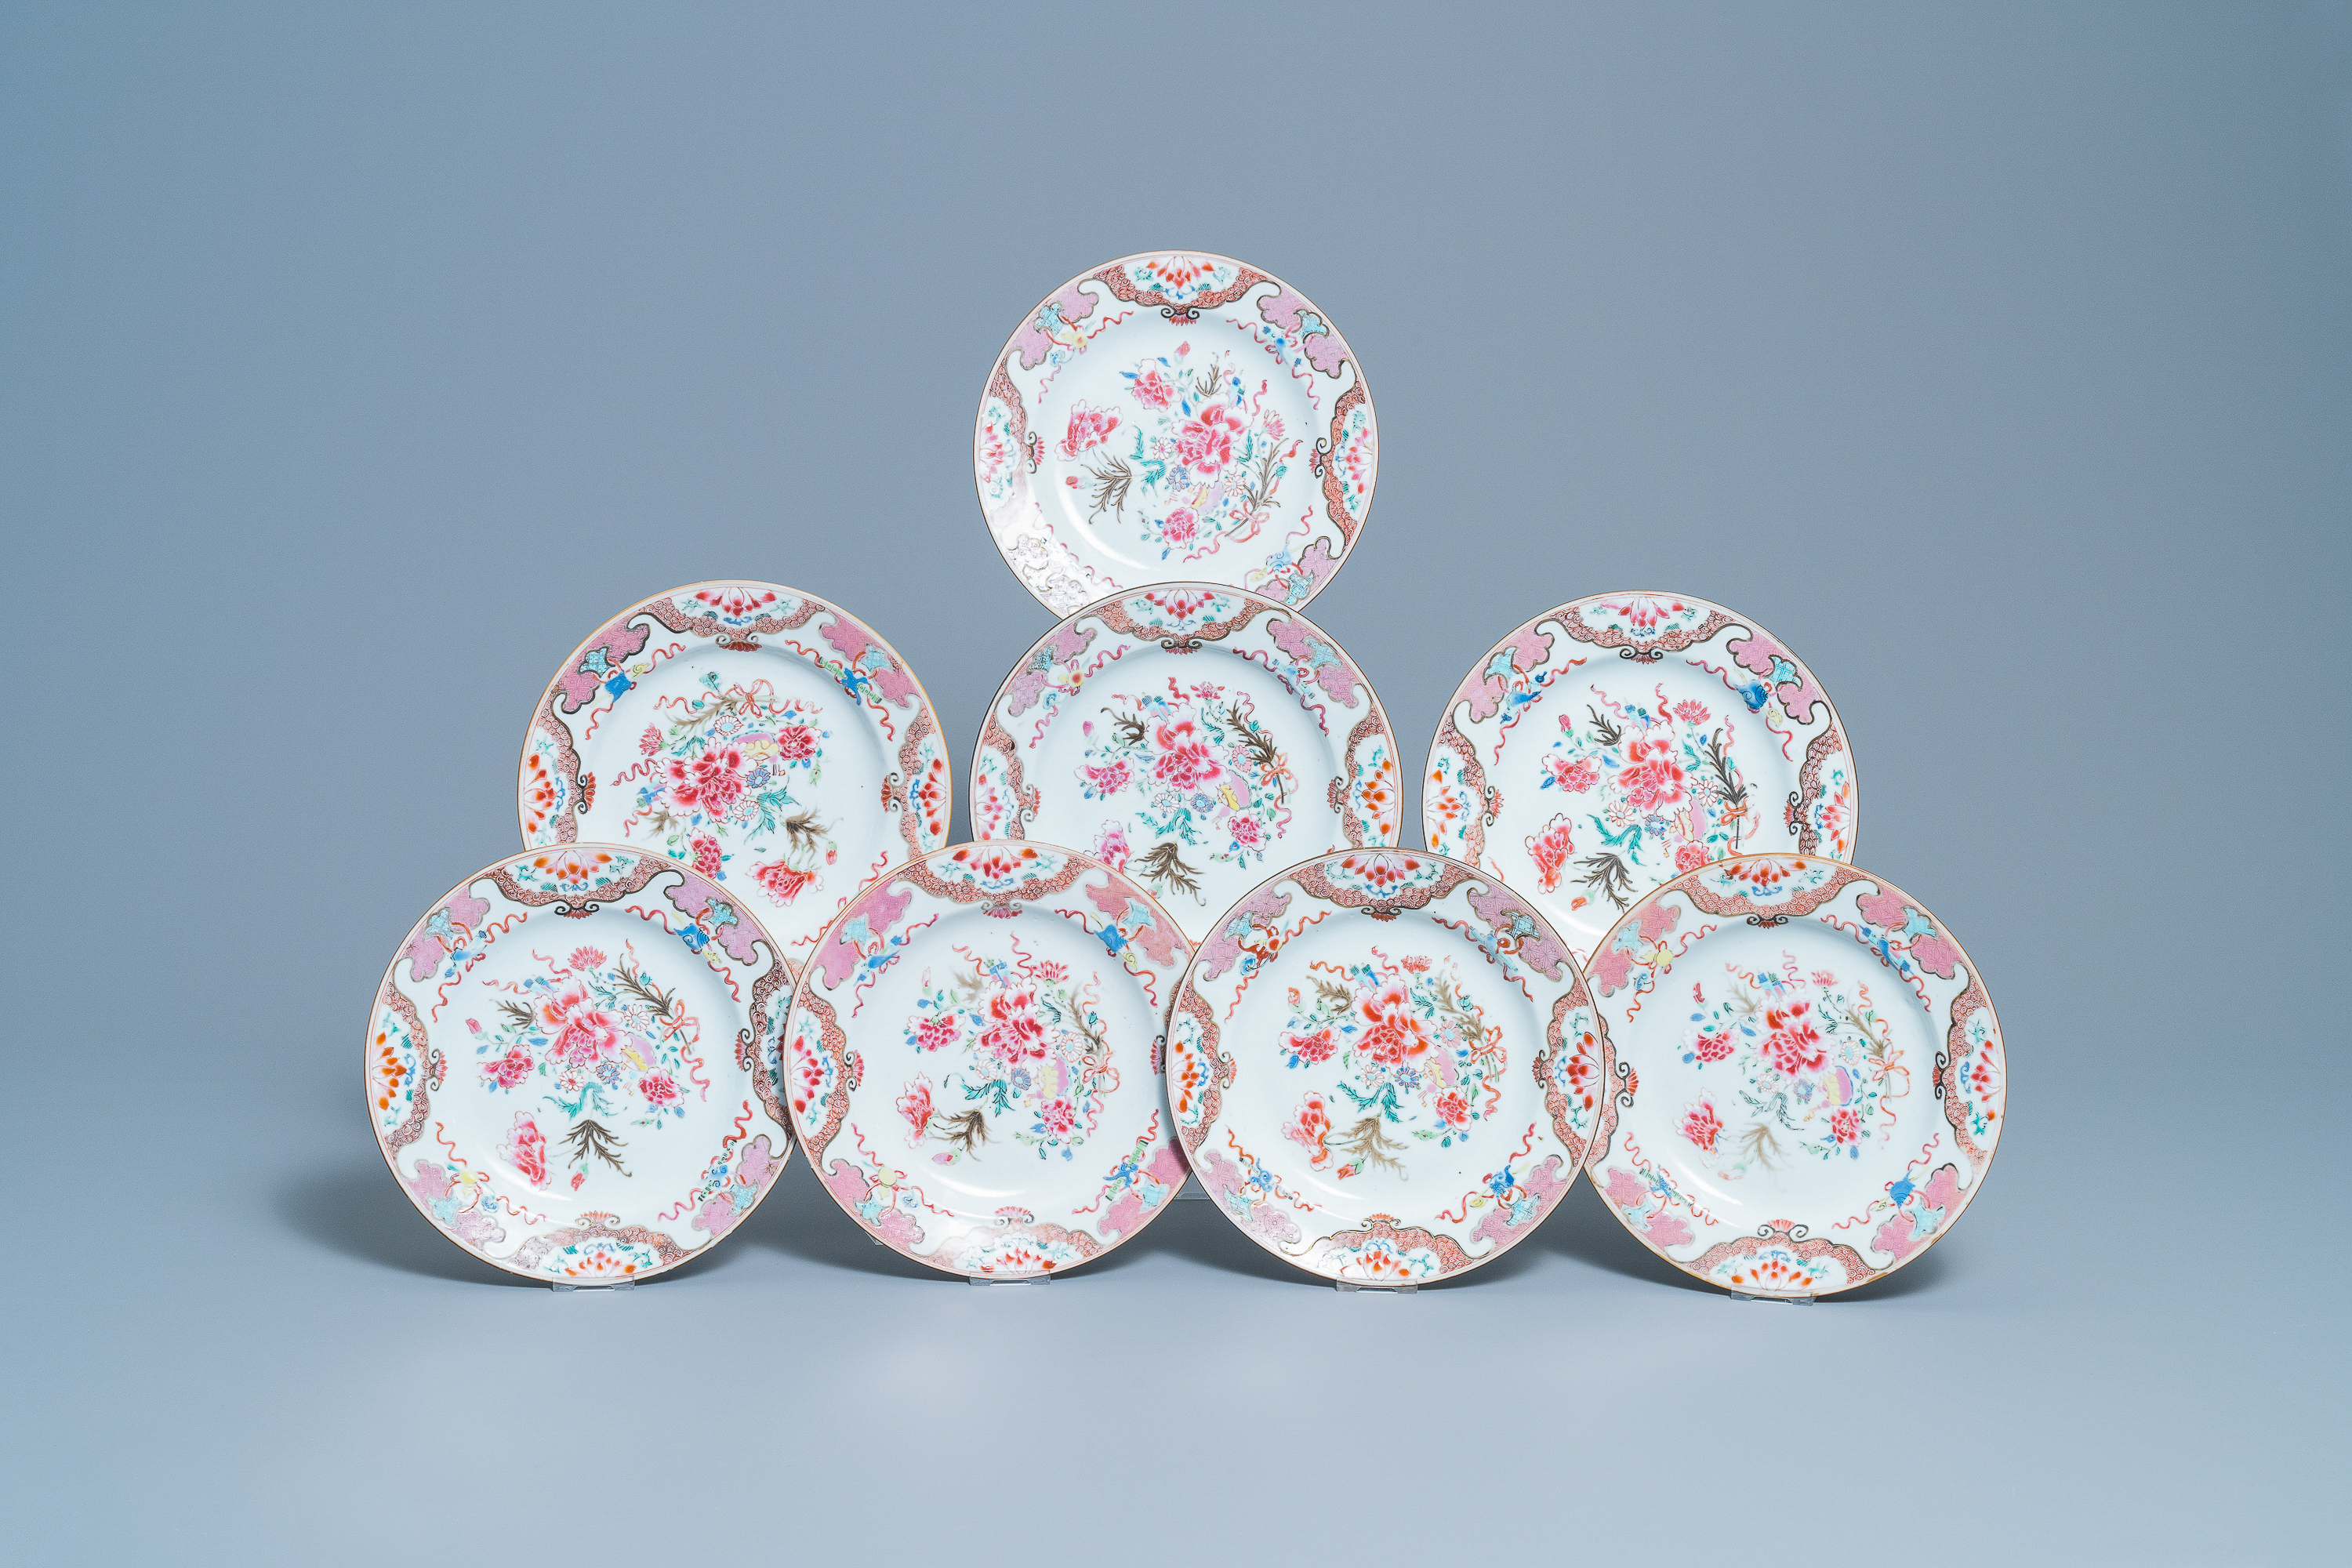 Eight Chinese famille rose plates with floral design, Qianlong